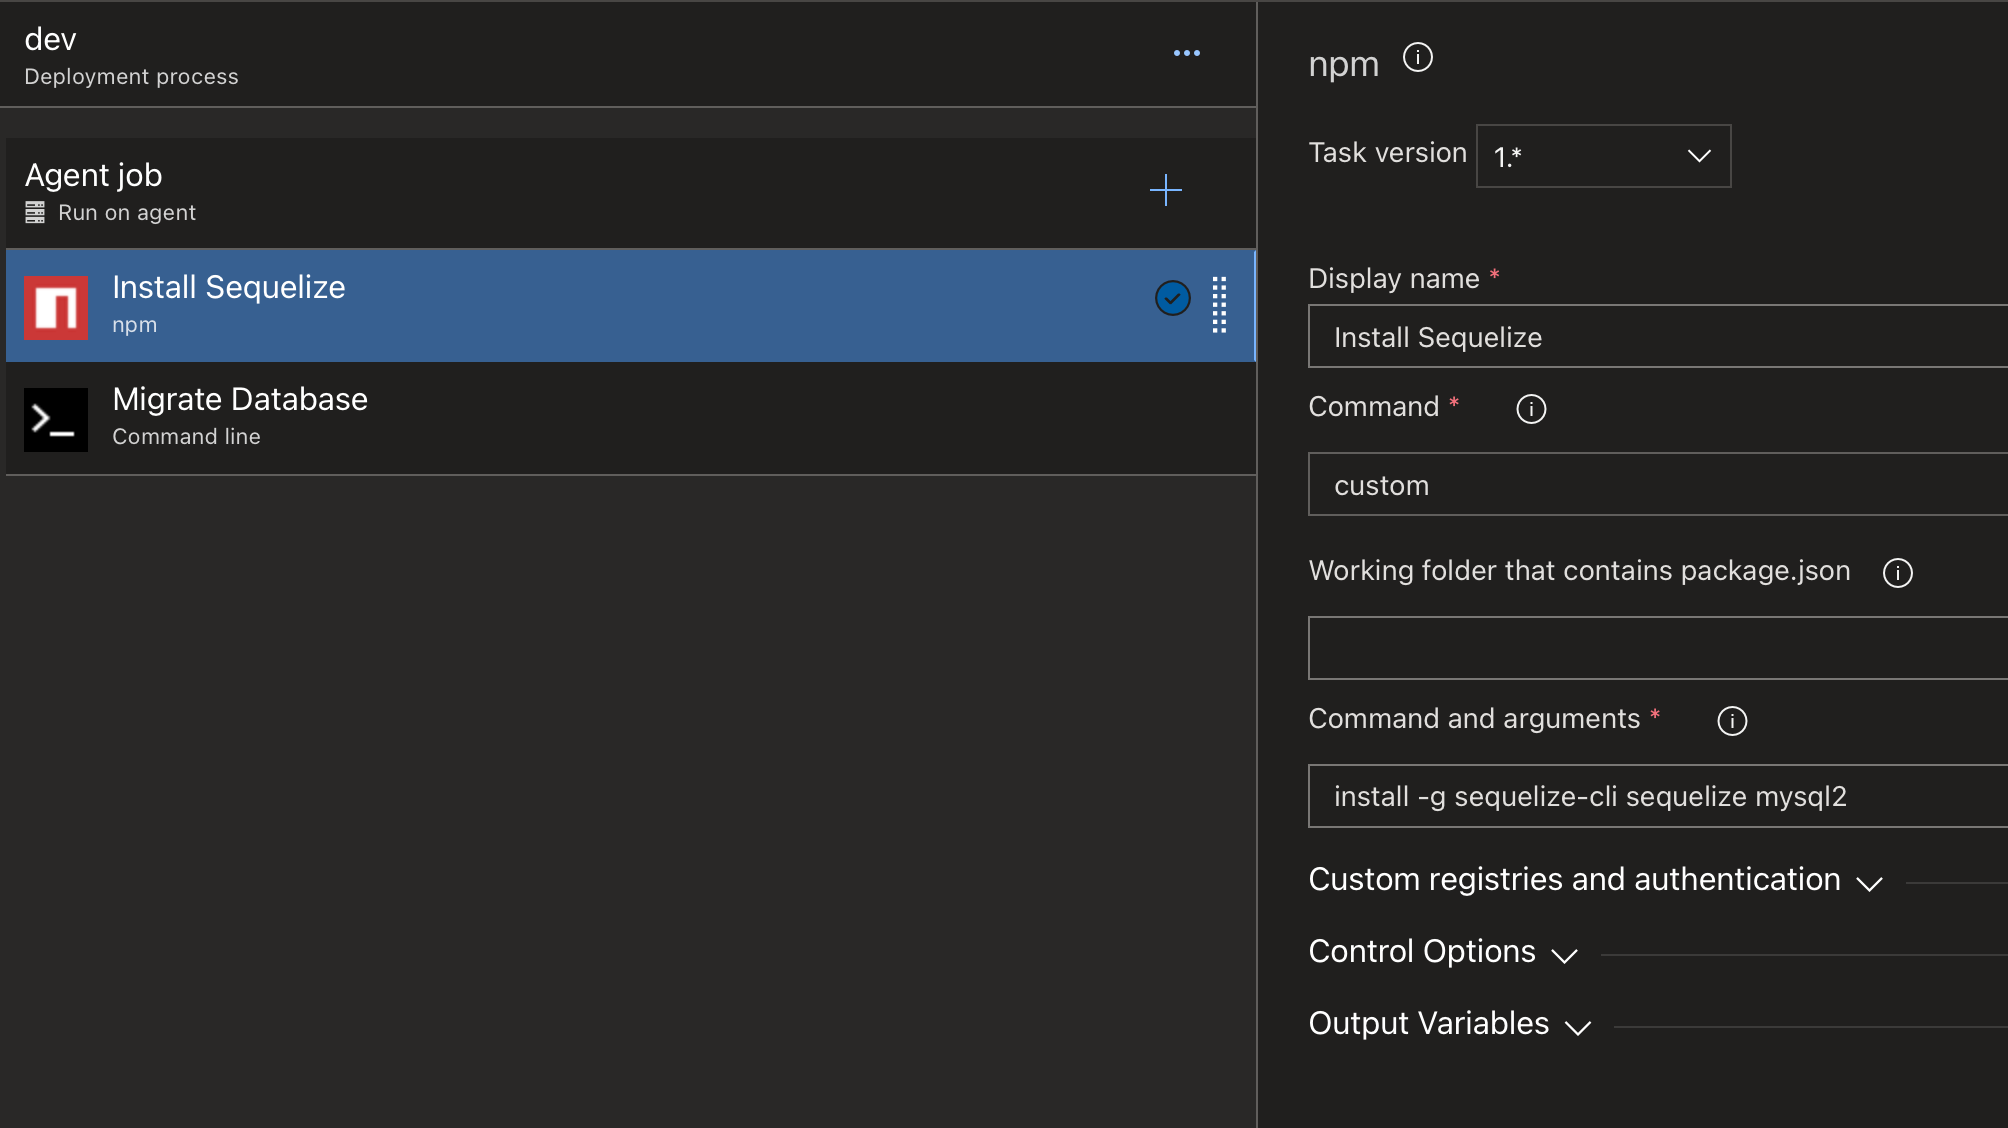 An azure pipeline task with a configured job to install sequelize and other dependant packages required to run the migrations on the command line. The dependencies are installed globally with NPM.